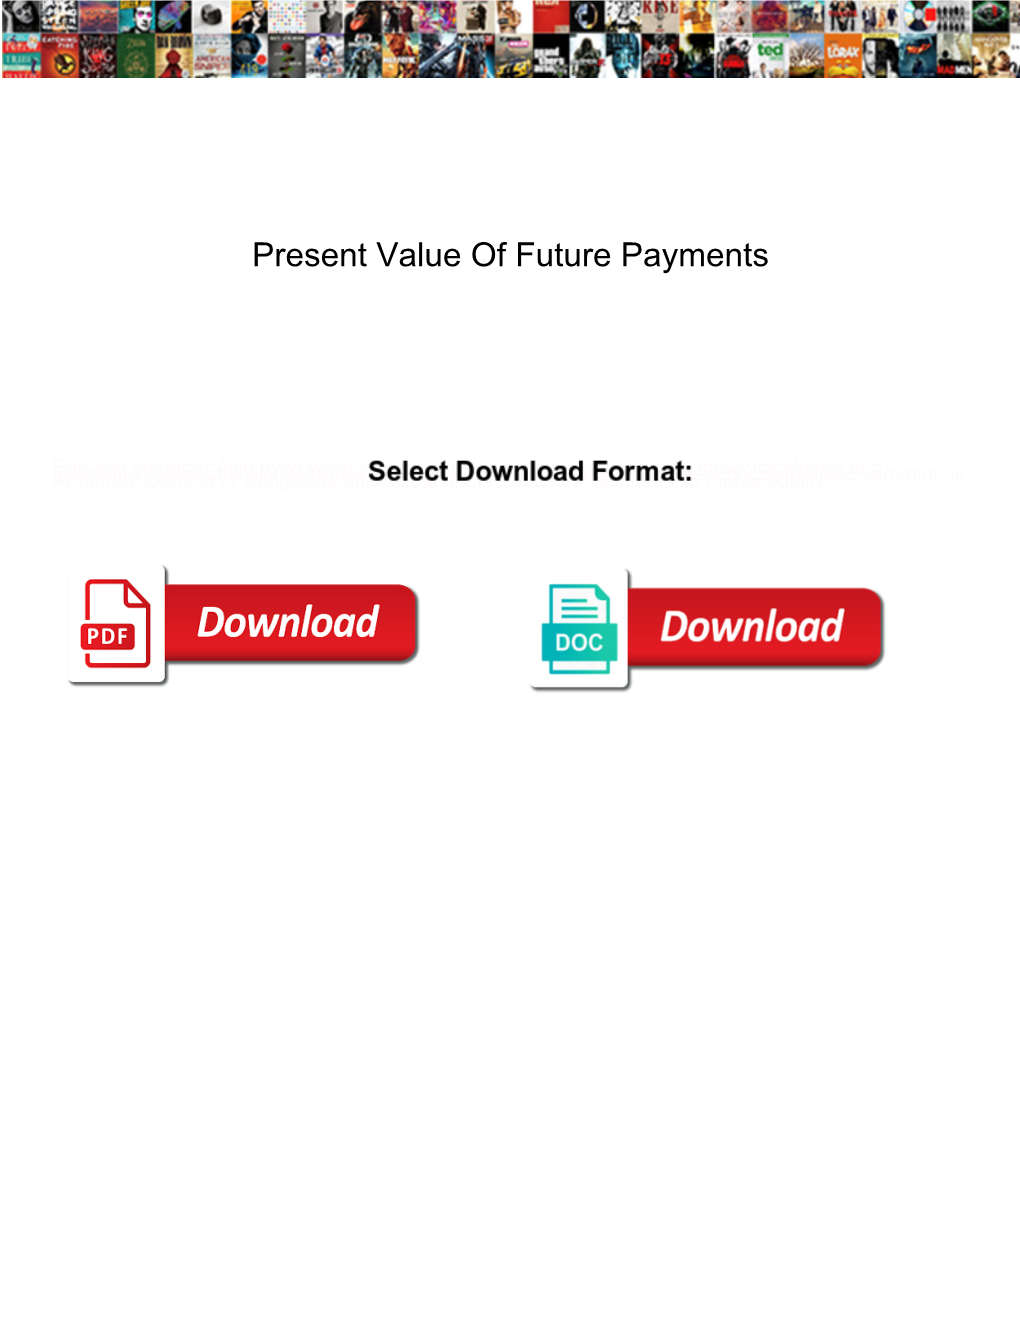 Present Value of Future Payments